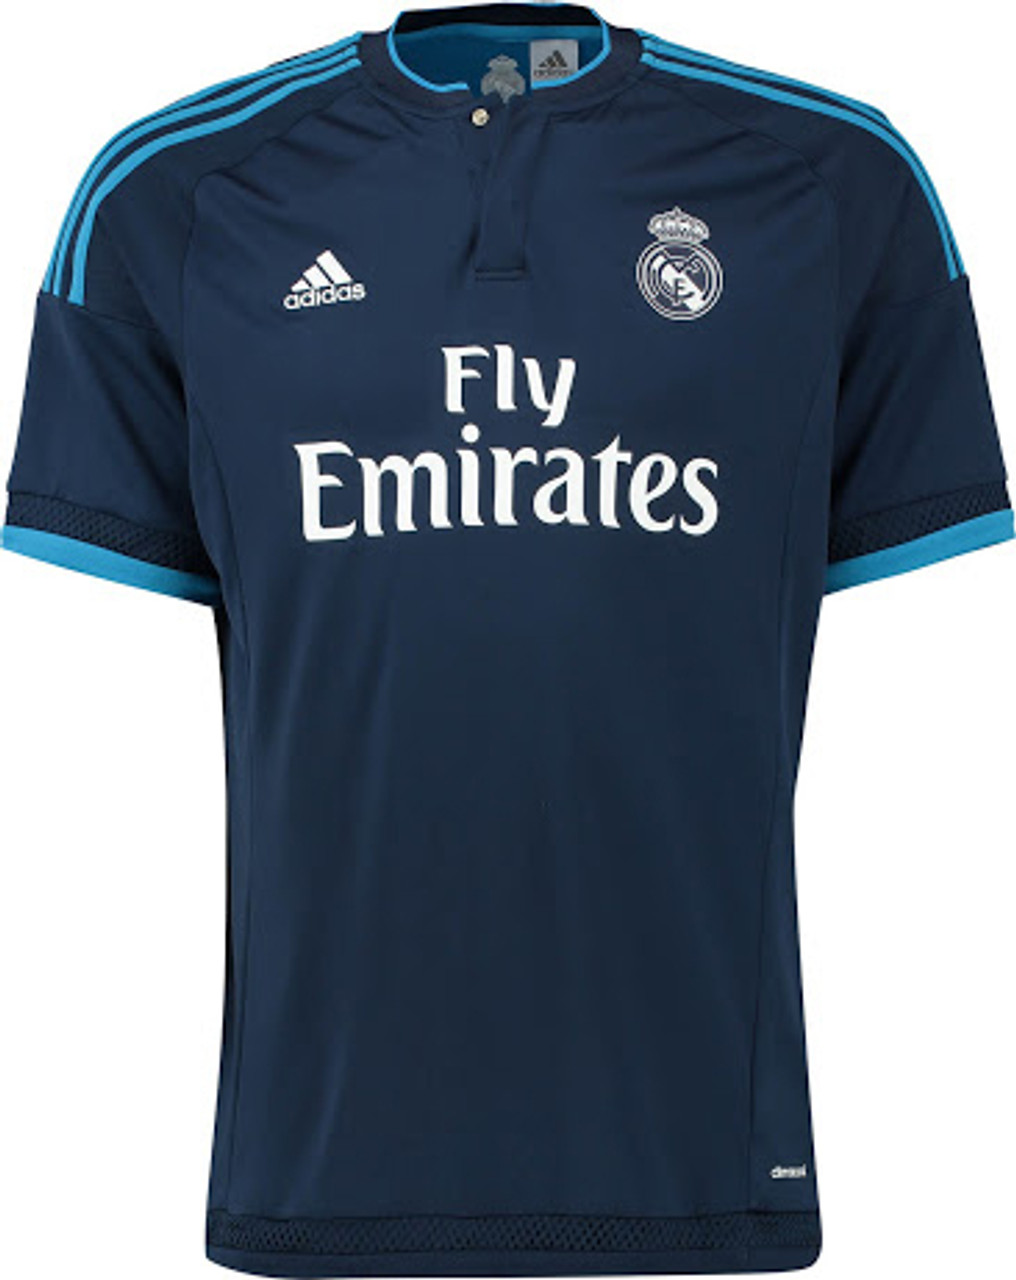 ADIDAS REAL MADRID 2016 AWAY 3rd JERSEY NAVY - Soccer Plus